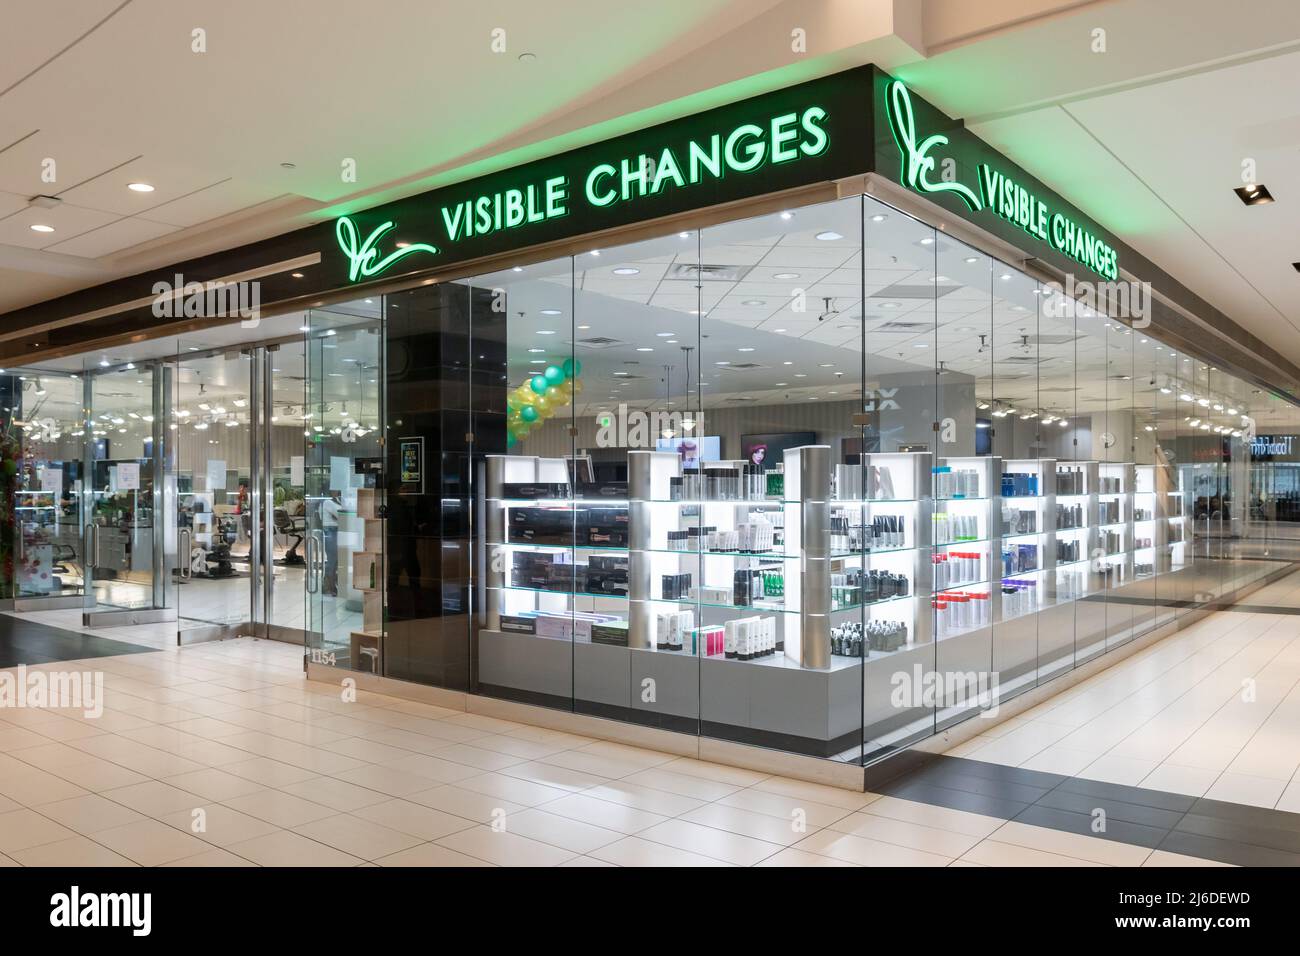 Houston, Texas, USA - February 25, 2022: A Visible Changes salon in a shopping mall. Stock Photo